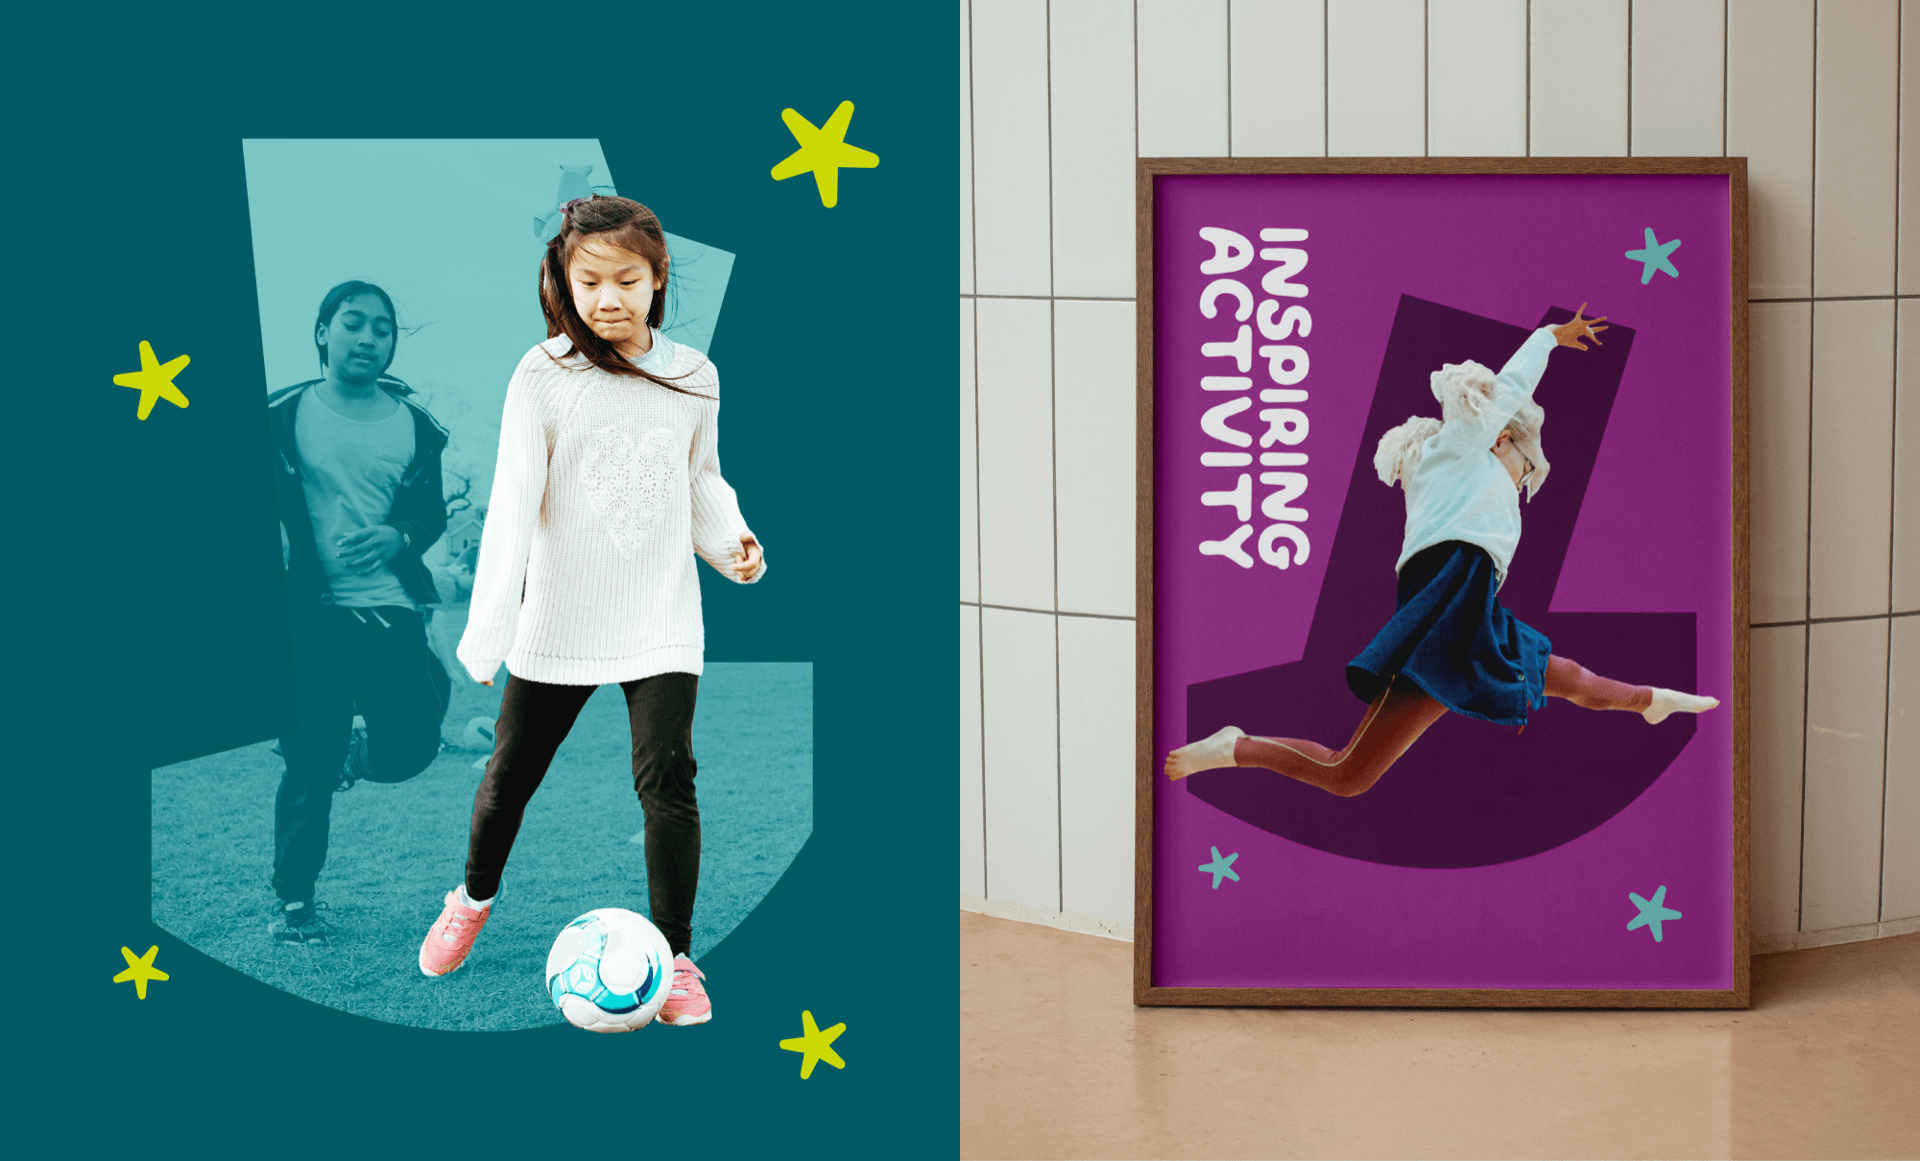 2 images side by side. The left showing a young girl kicking a football and the right showing a framed picture of a young girl participating in a gymnastics activity